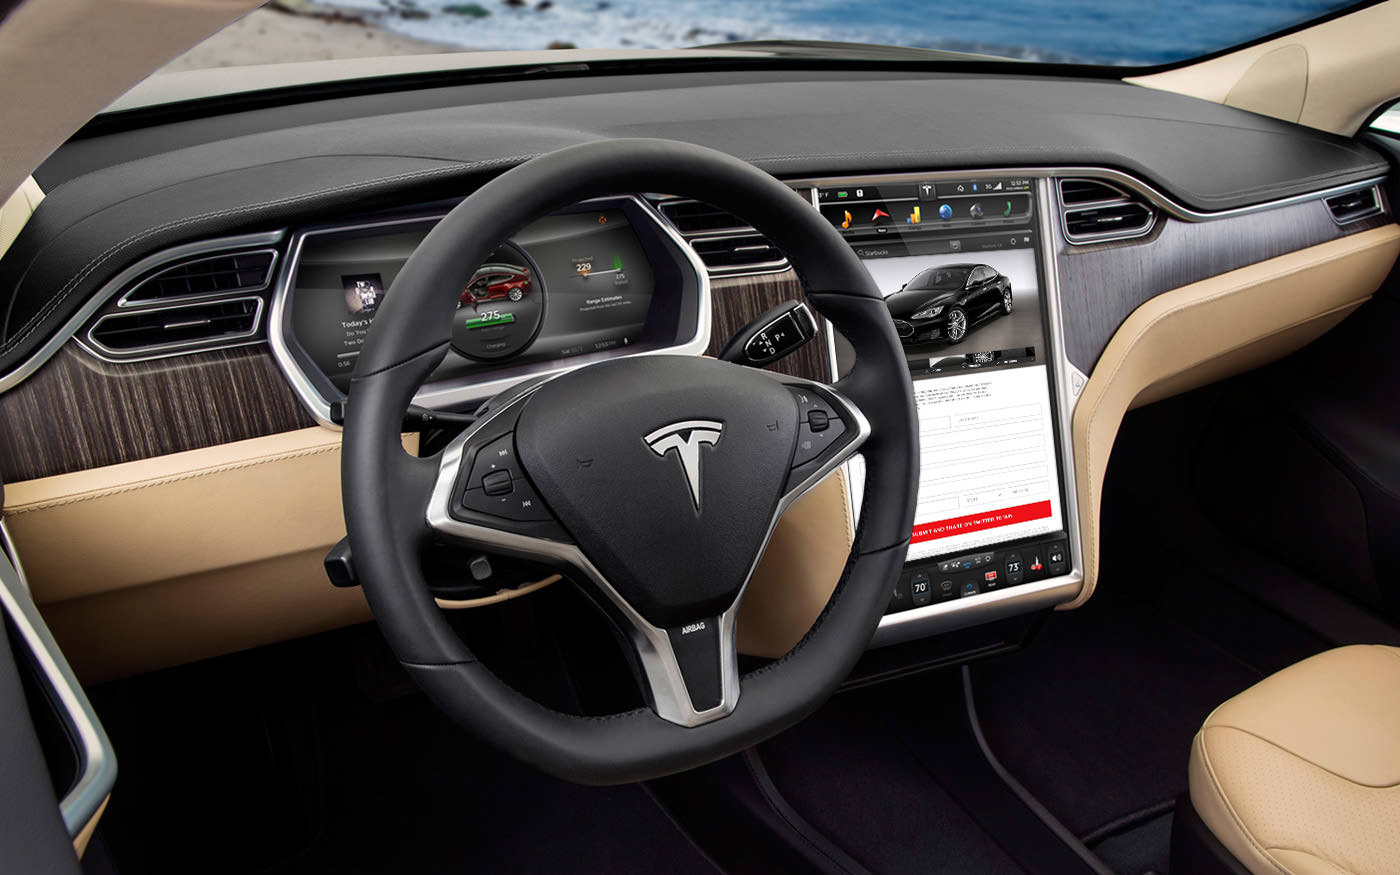 Homepage design for the Tesla promotional site shown on a Tesla's in-dash screen